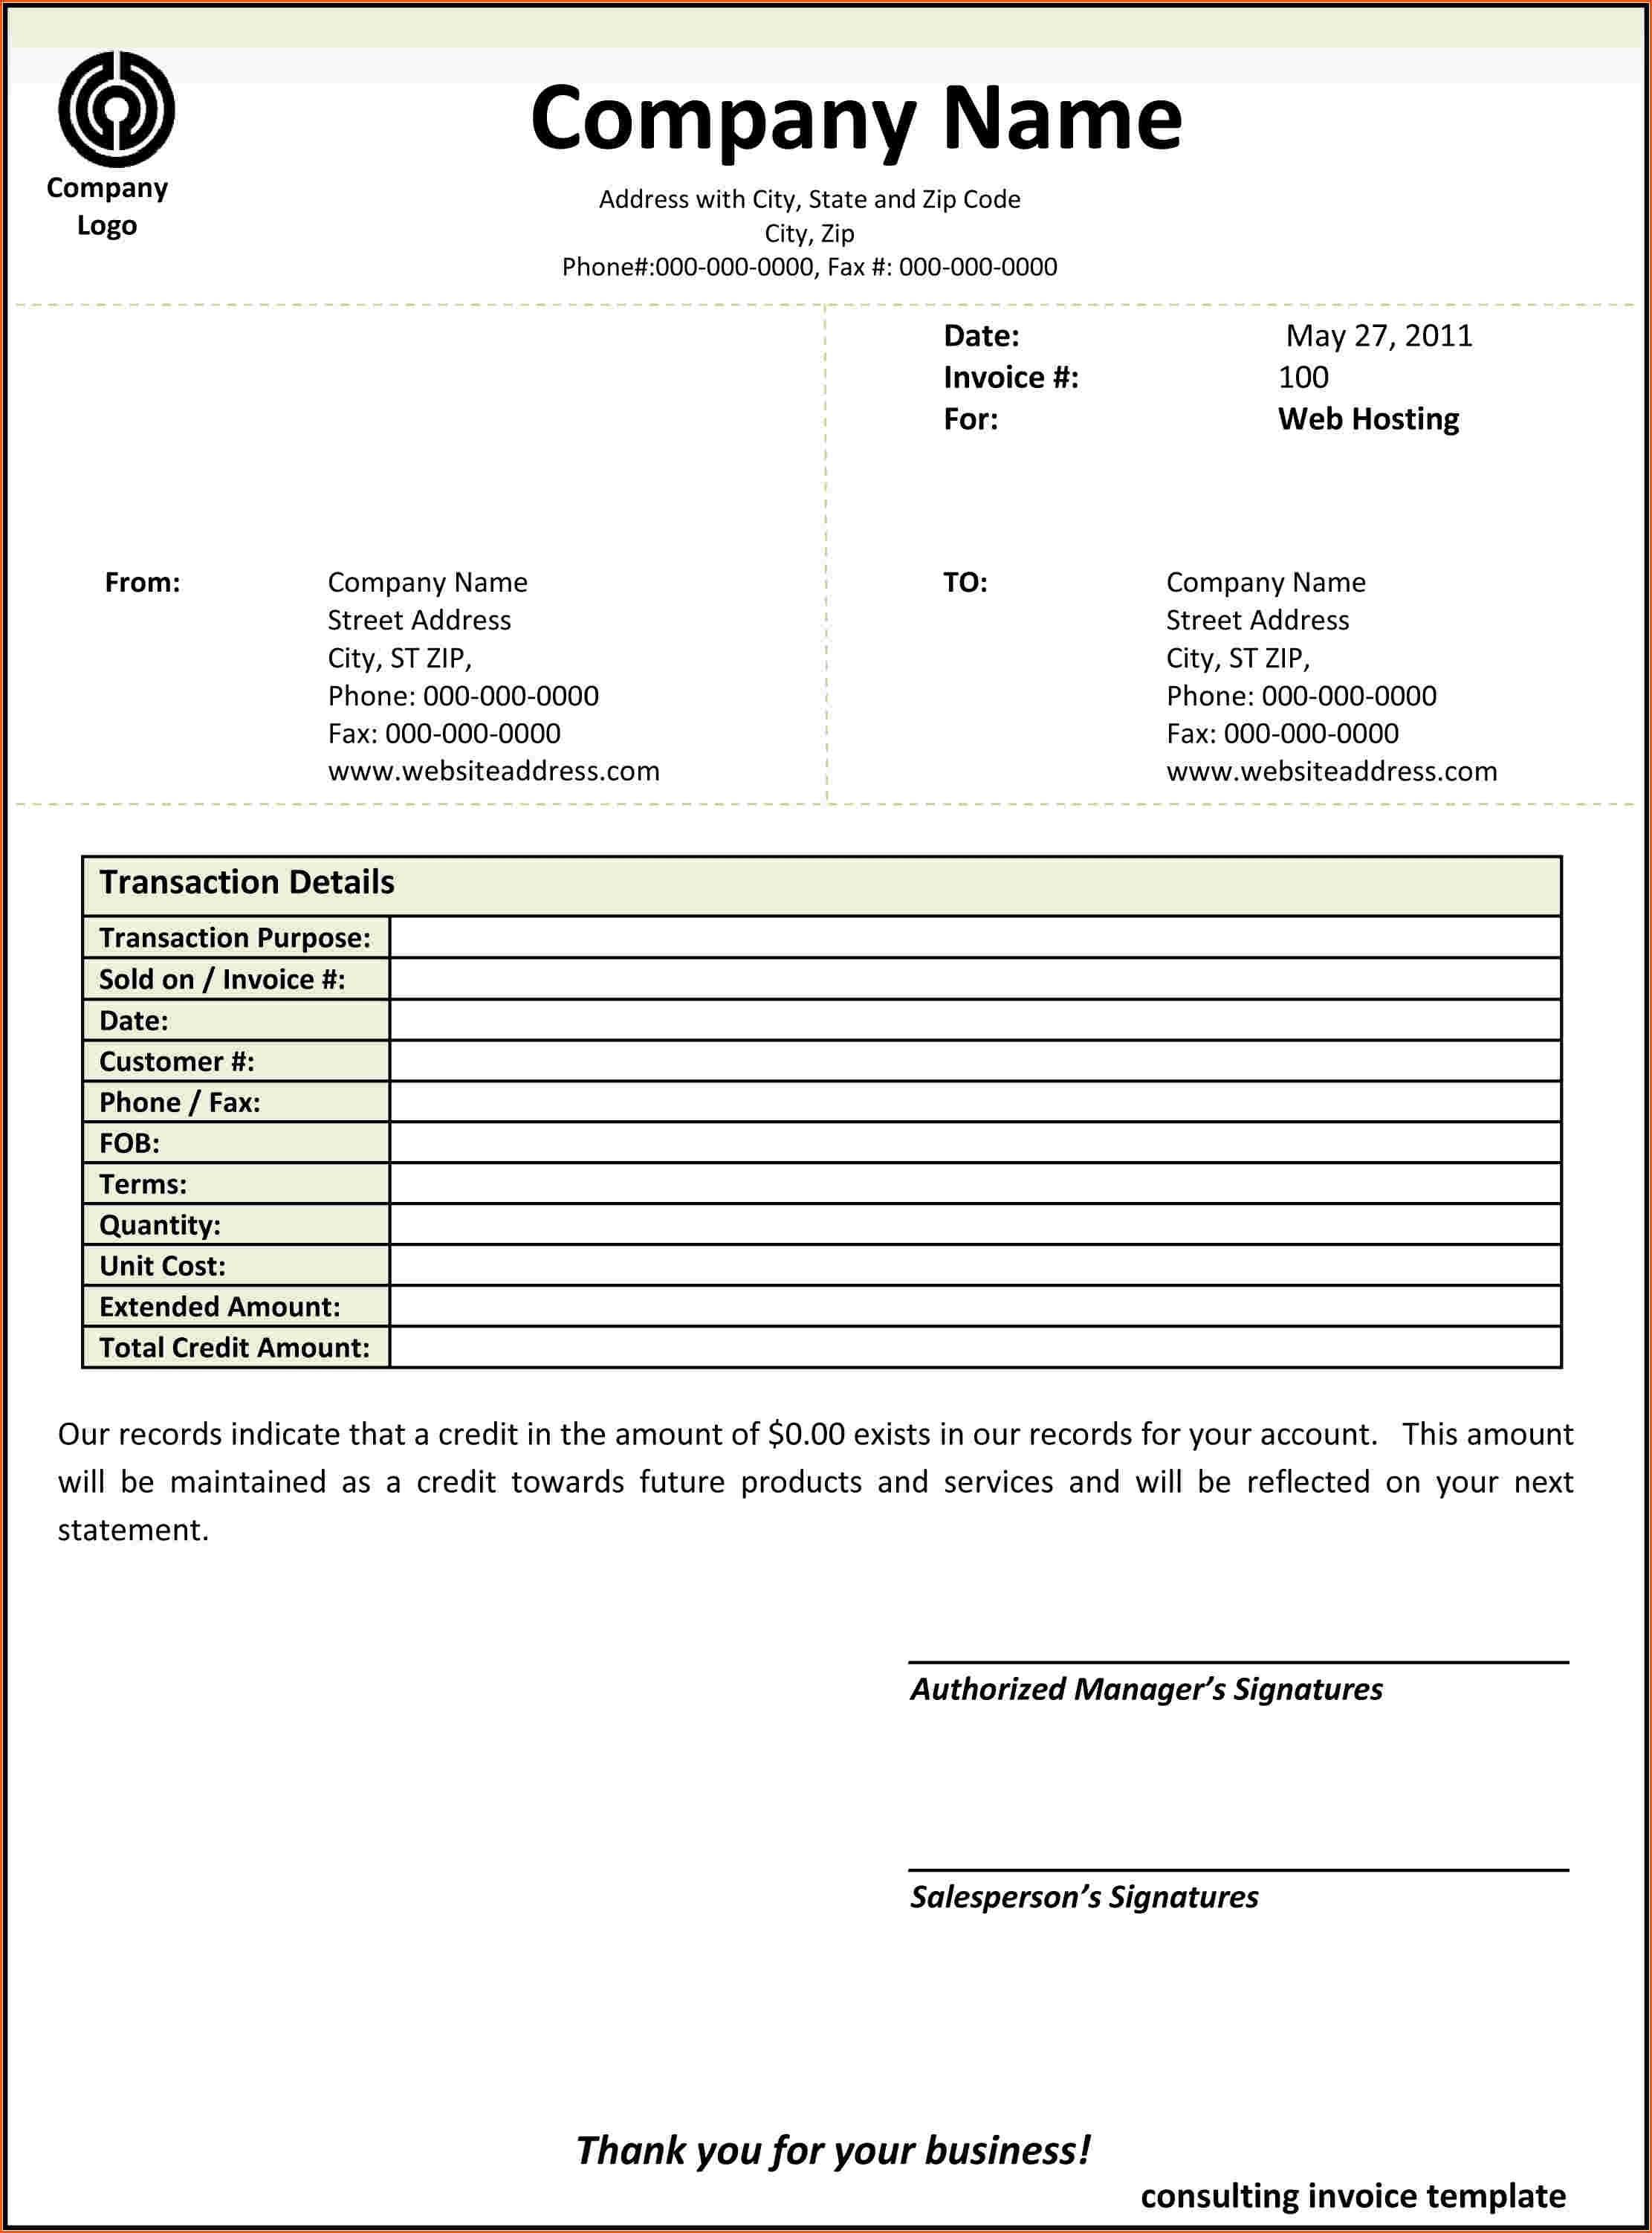 8 consulting invoice template word denial letter sample consultant invoice template word